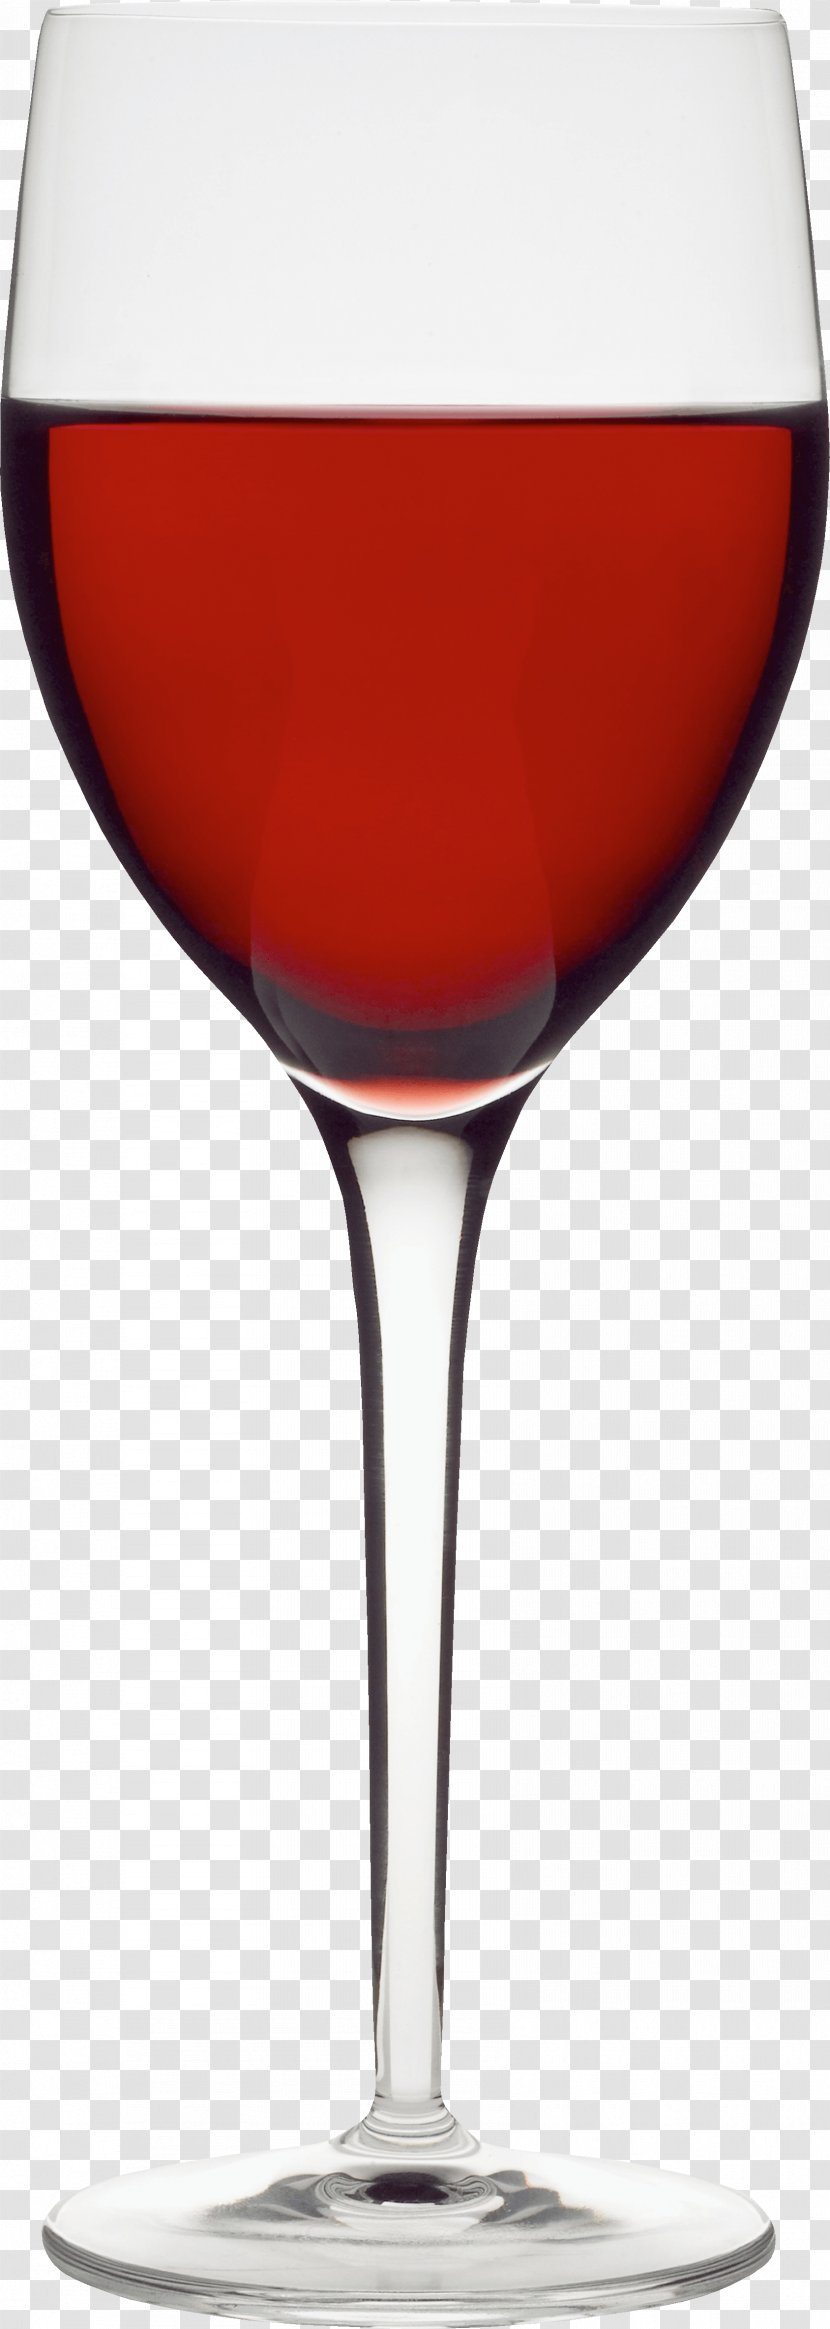 Red Wine Glass Cocktail - Drink - Image Transparent PNG